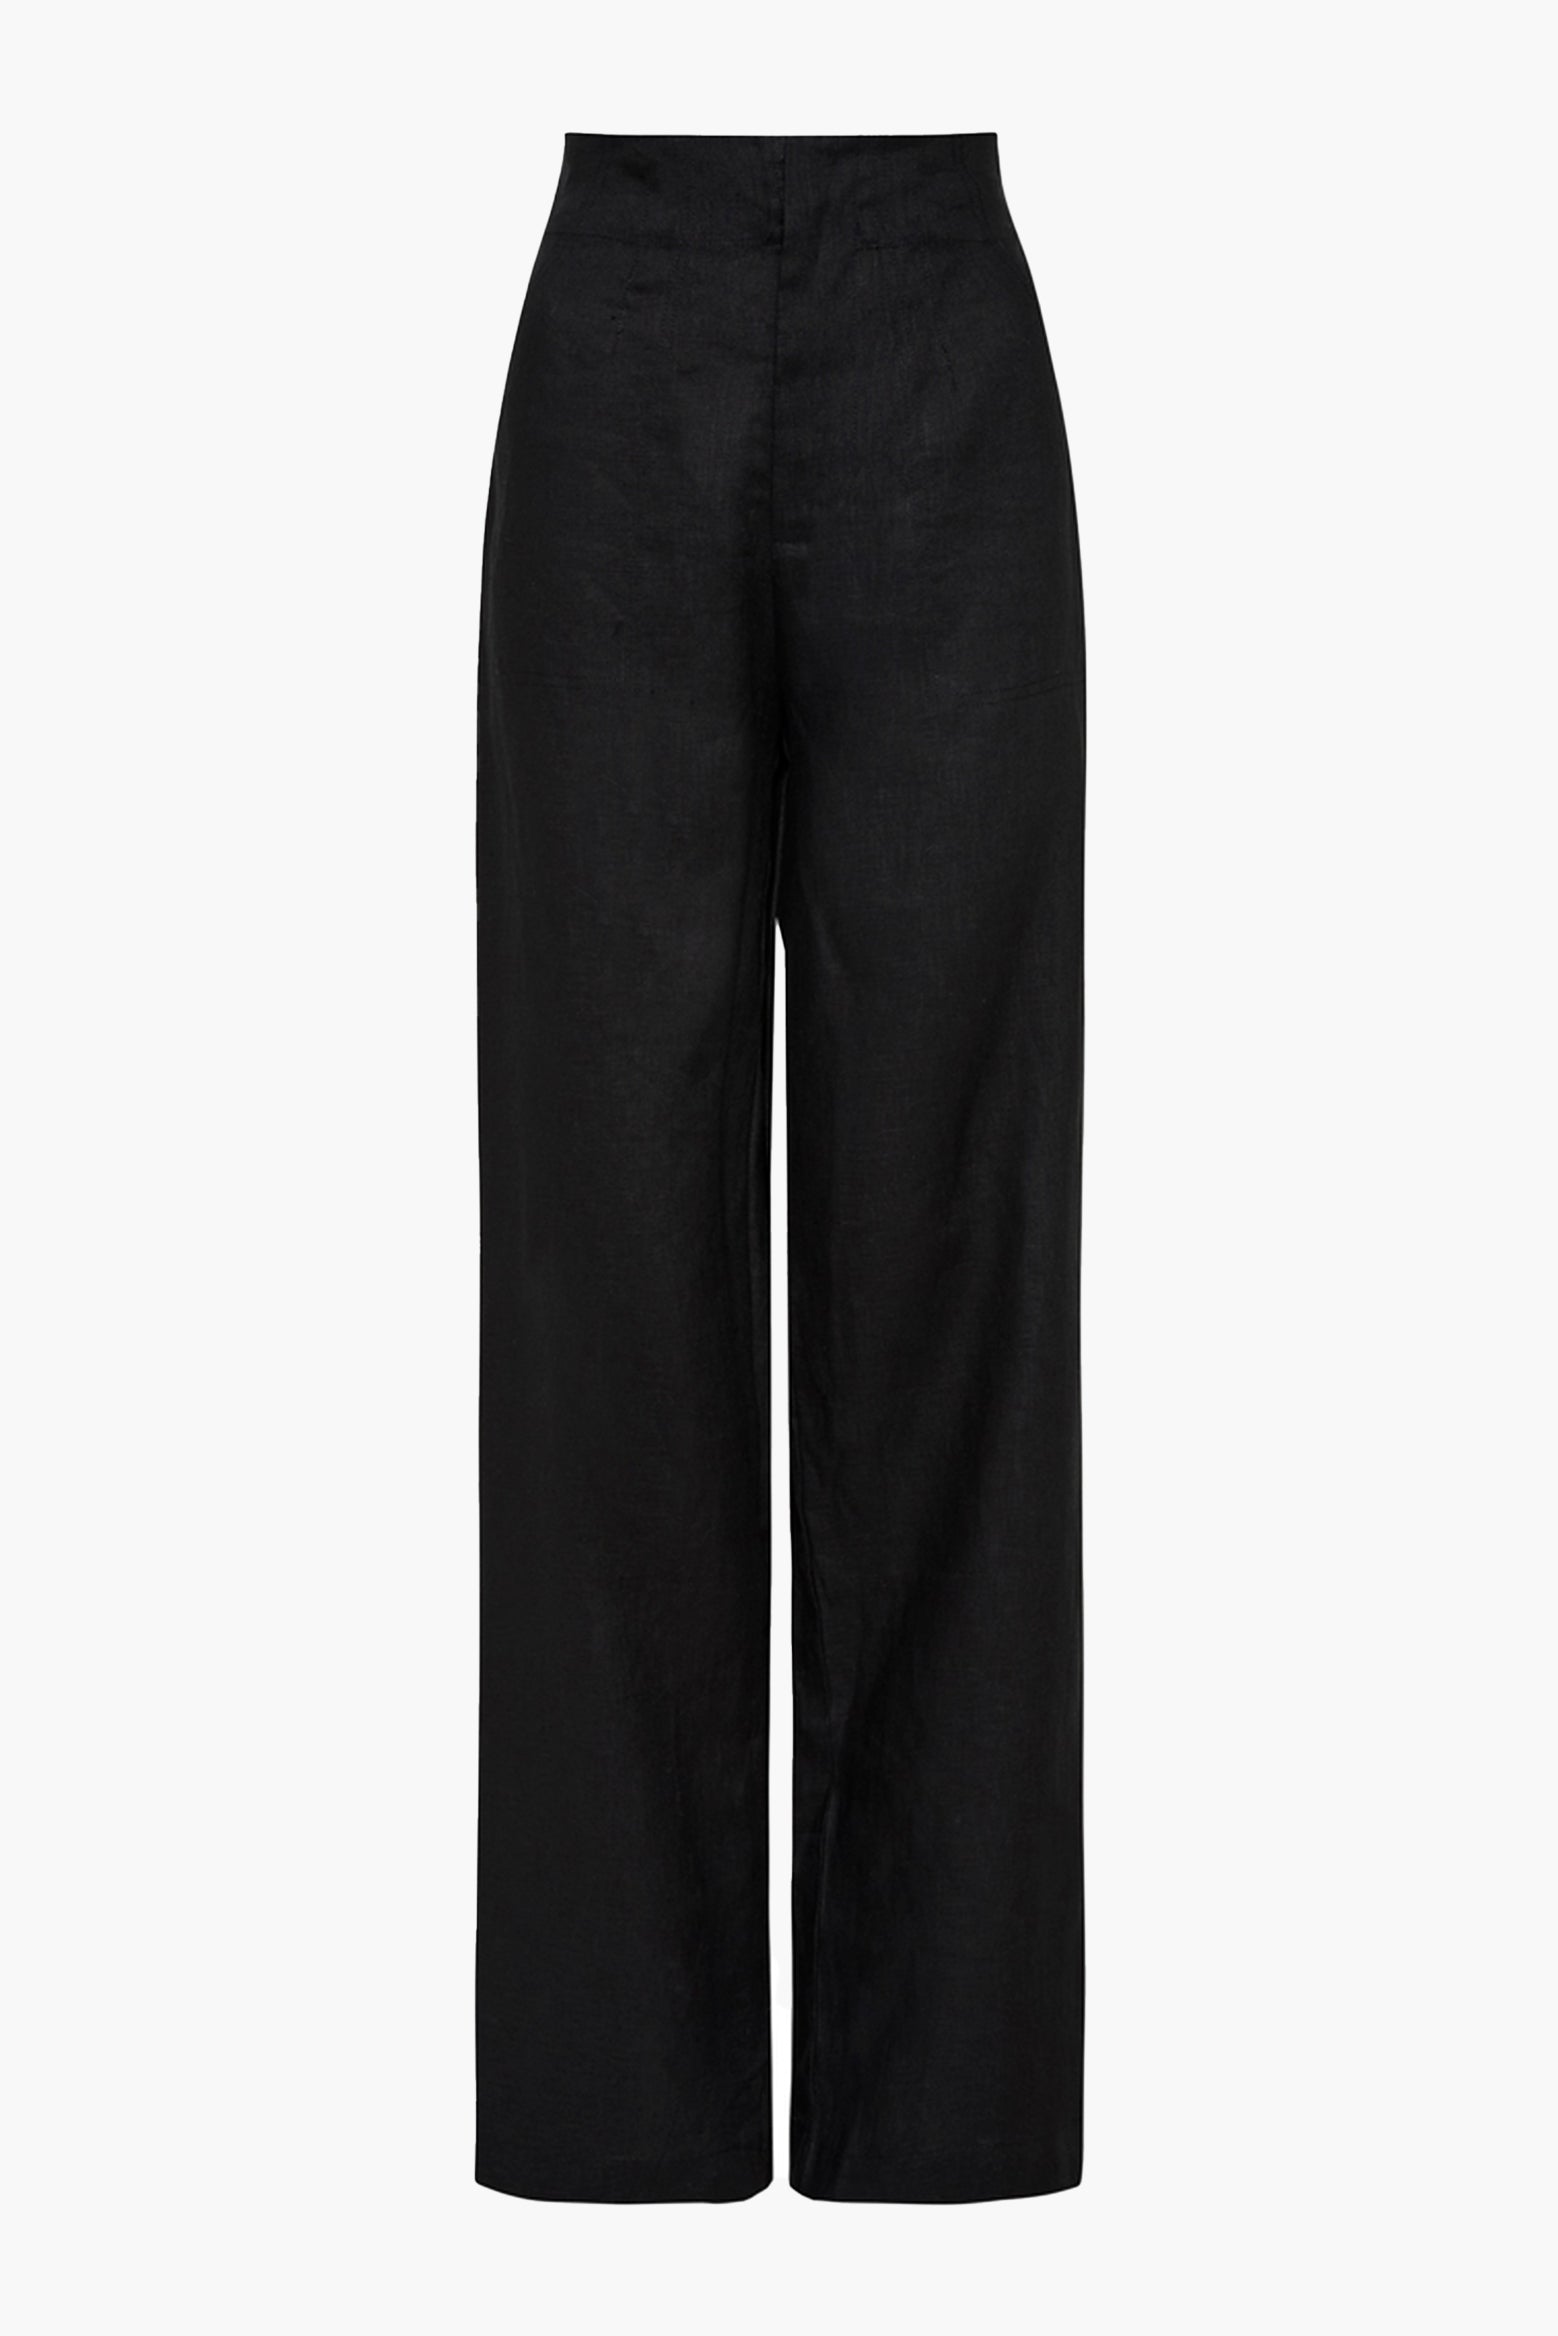 Faithfull The Brand Isotta Pant in Black available at The New Trend Australia.